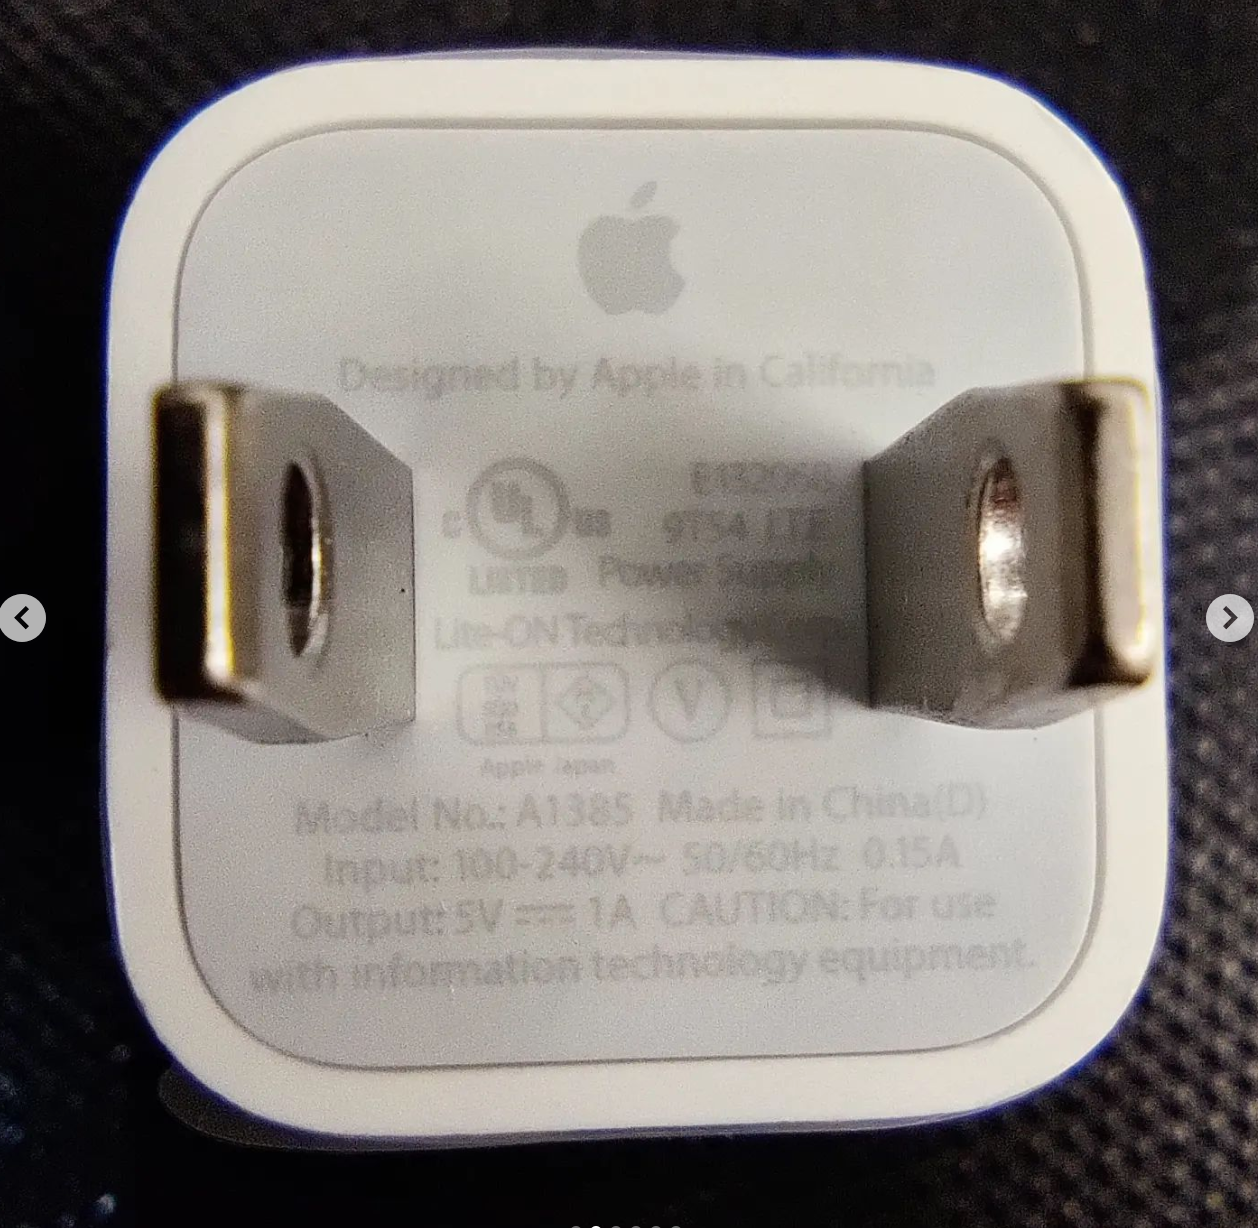 Apple USB 5W Power Adapter Wall Charger MD810LL/A - A1385 Genuine Grade A - One Year Warranty